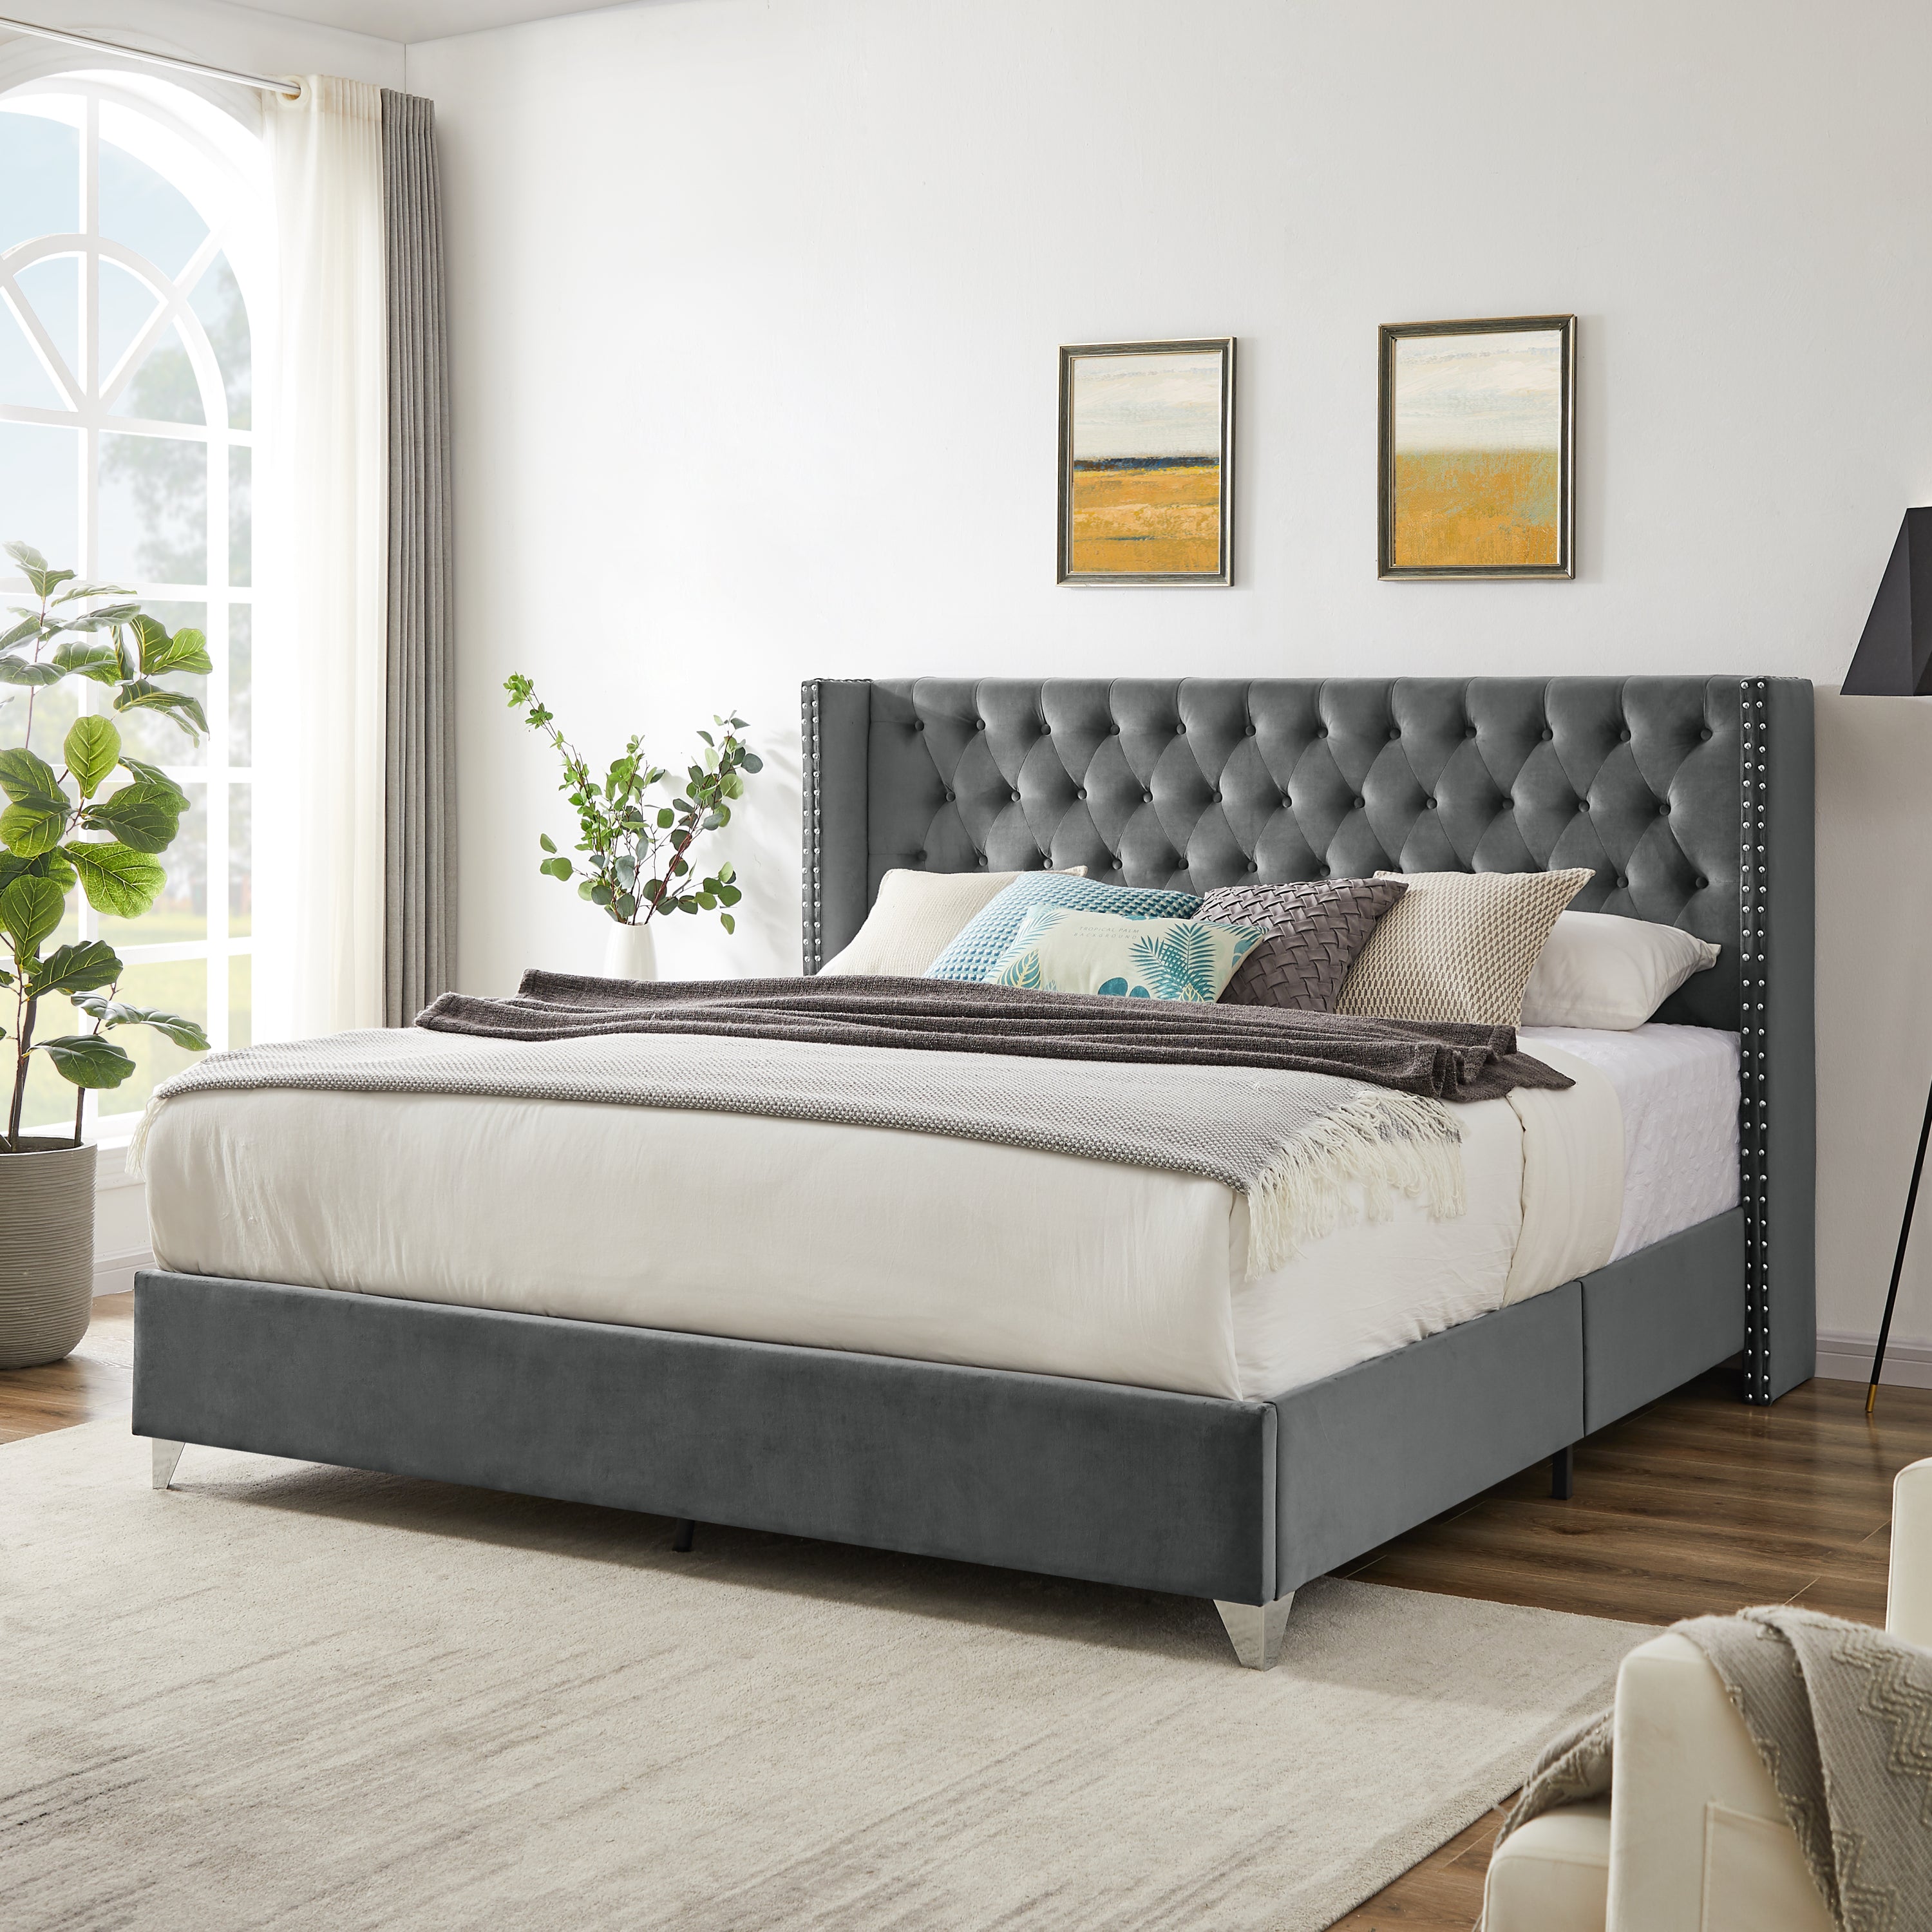 King bed, Button designed Headboard - Gray